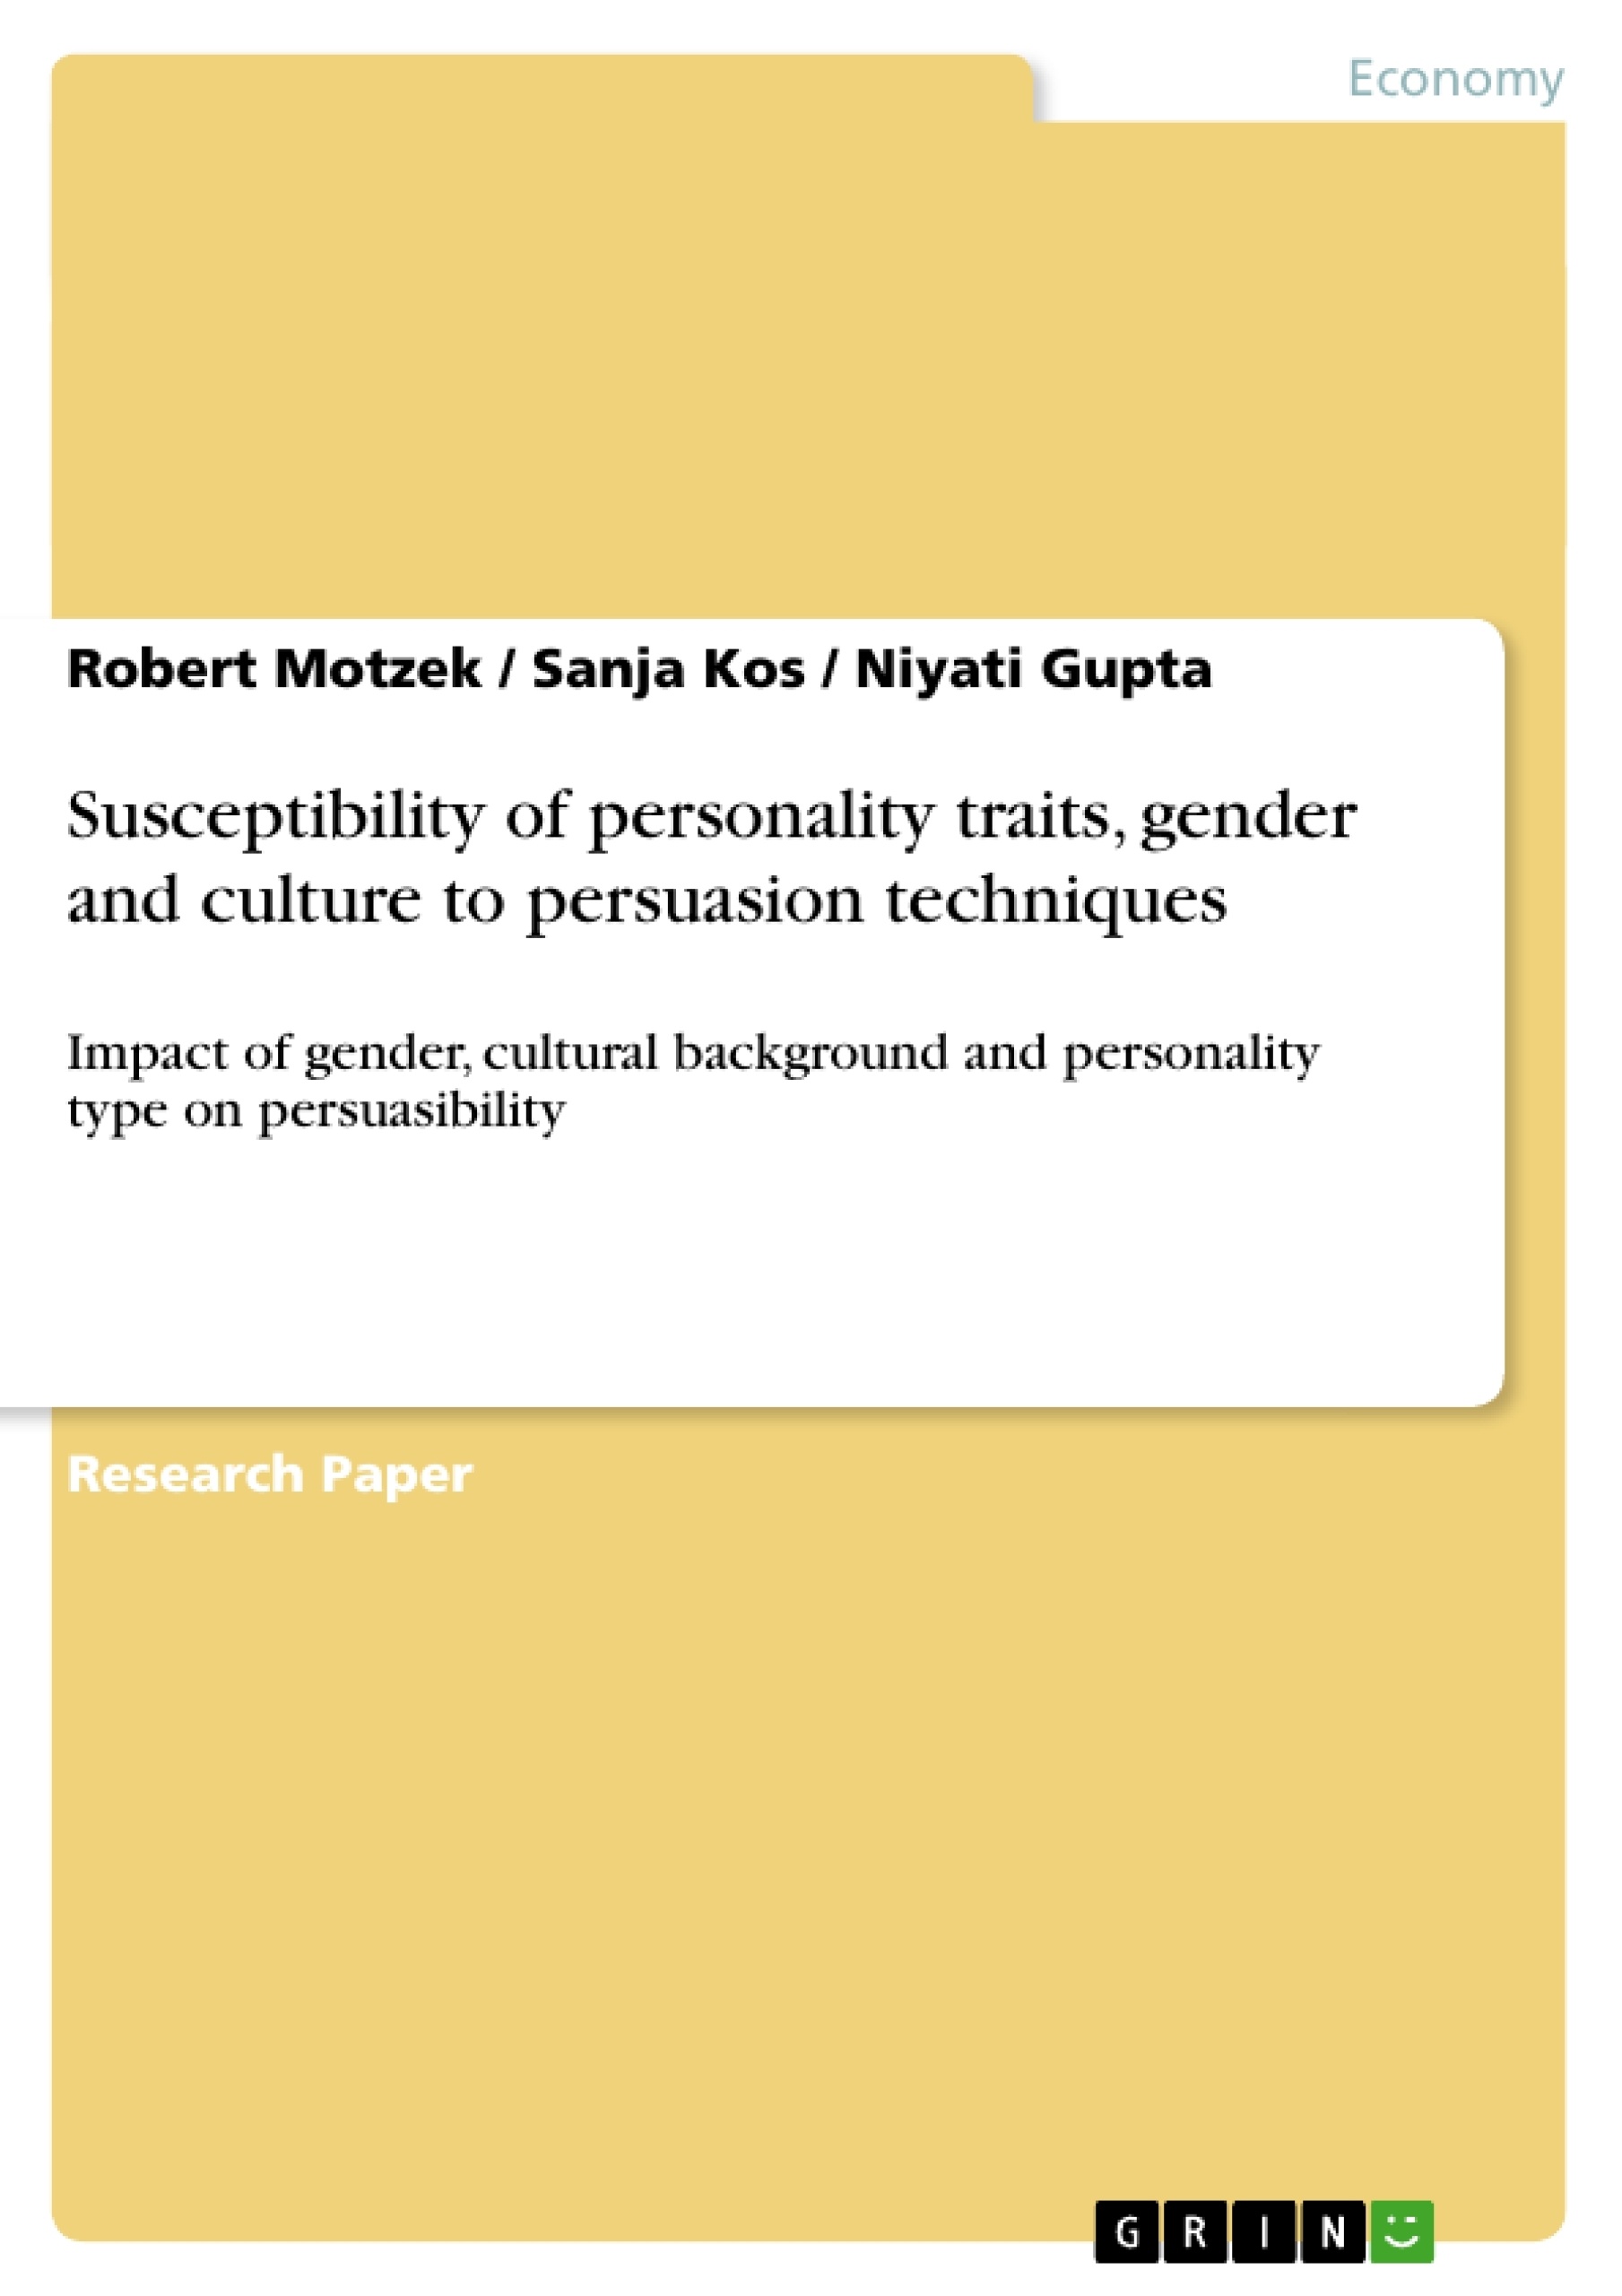 research paper on personality types